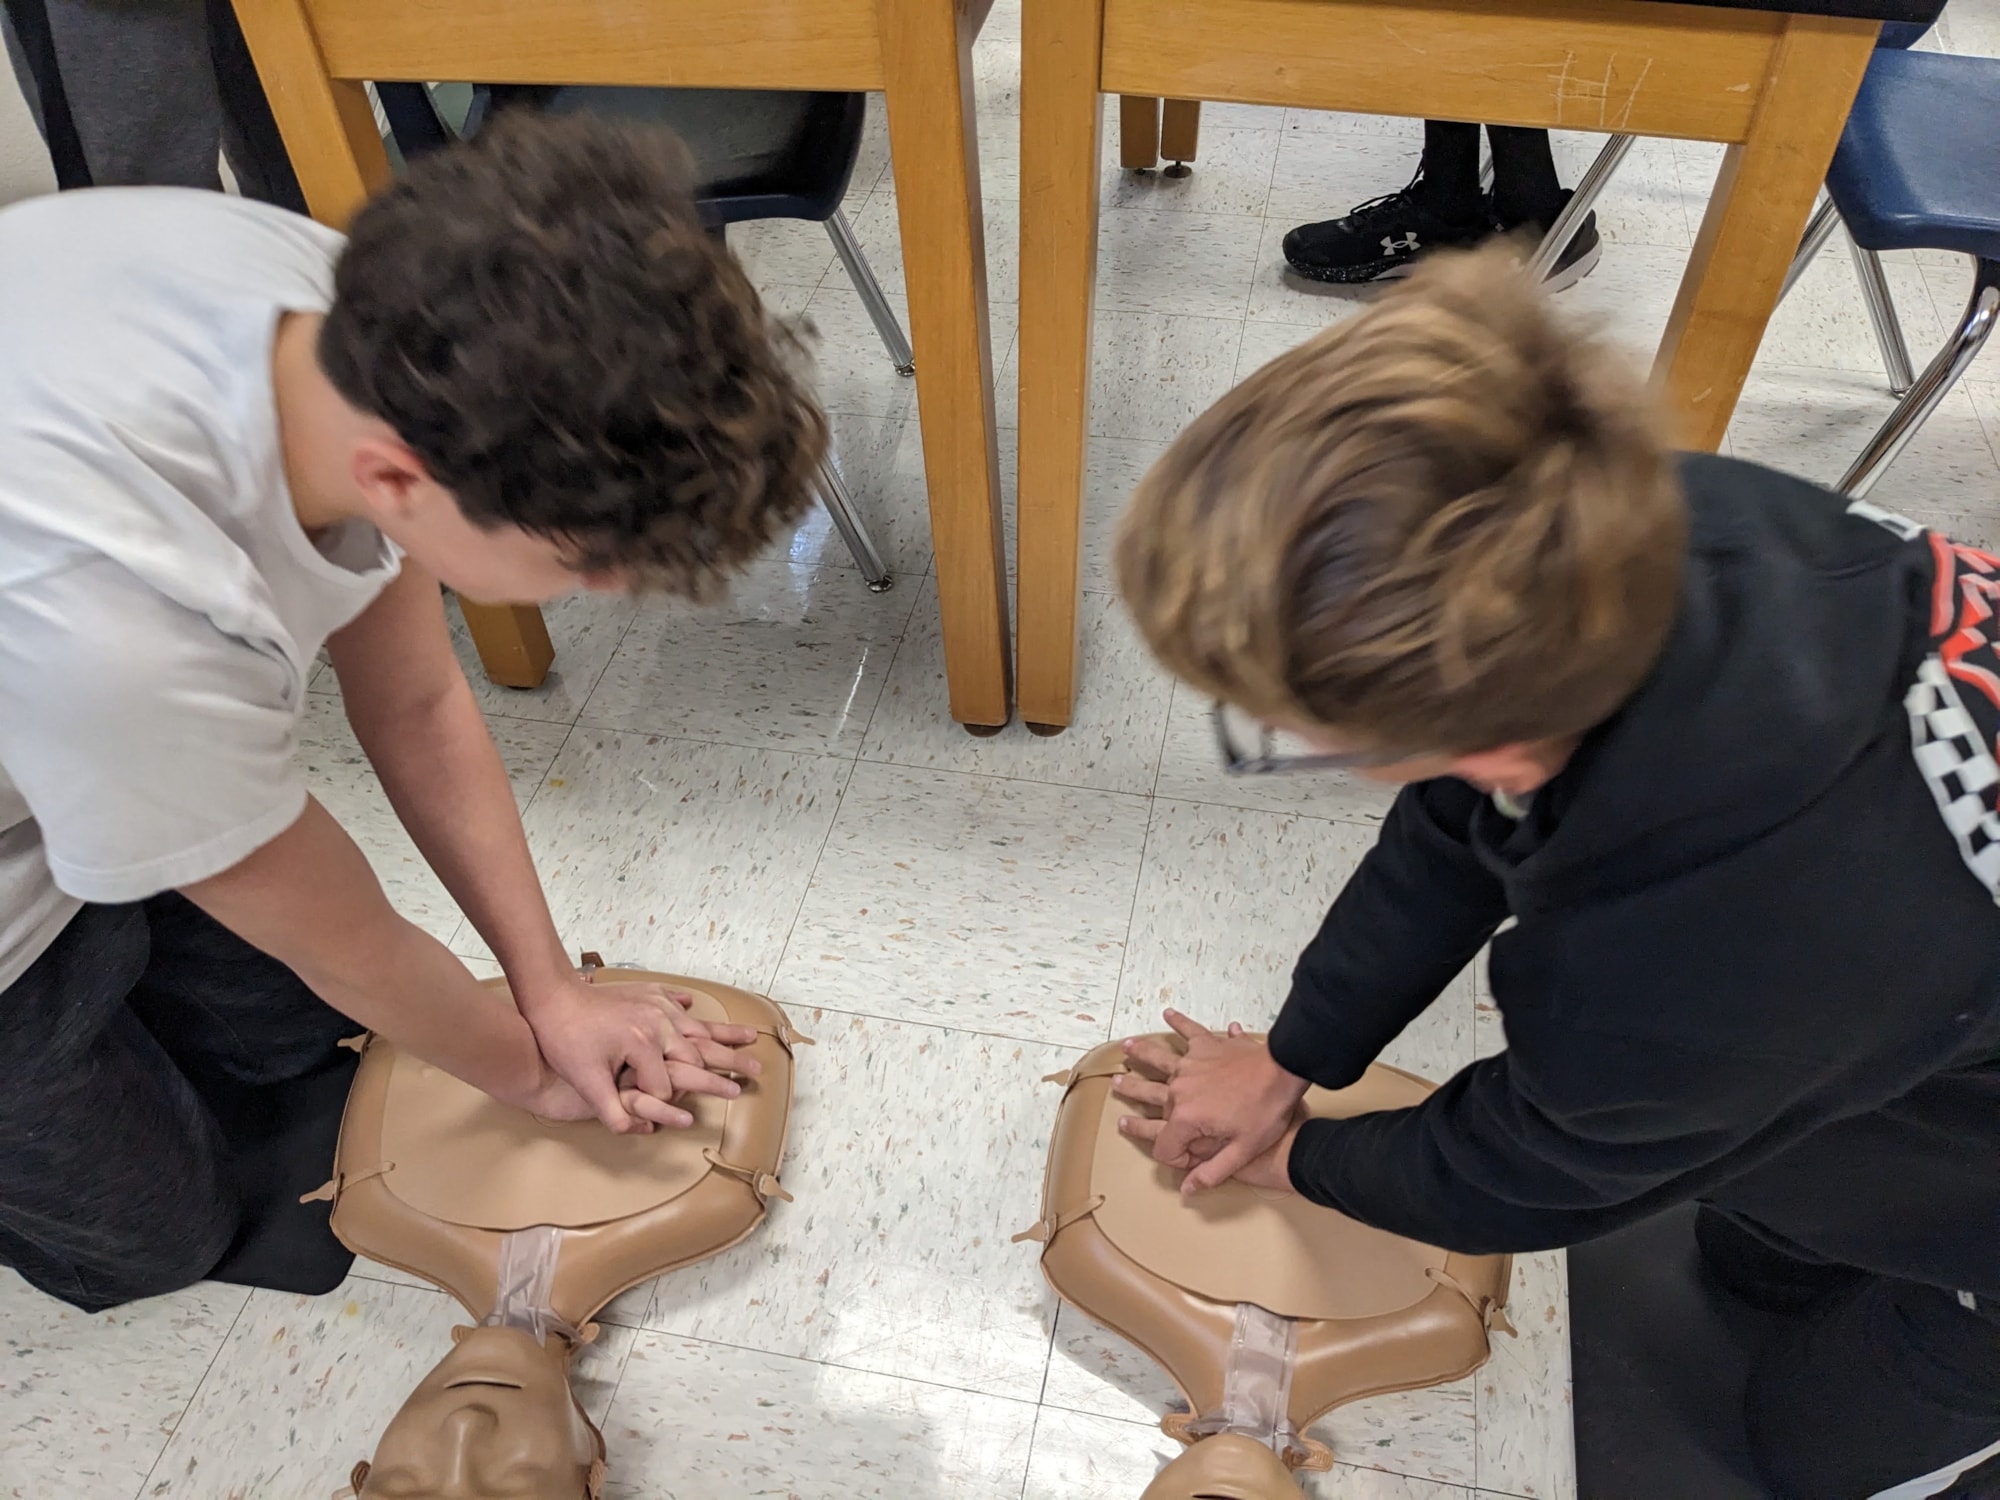 Students practicing hands only CPR